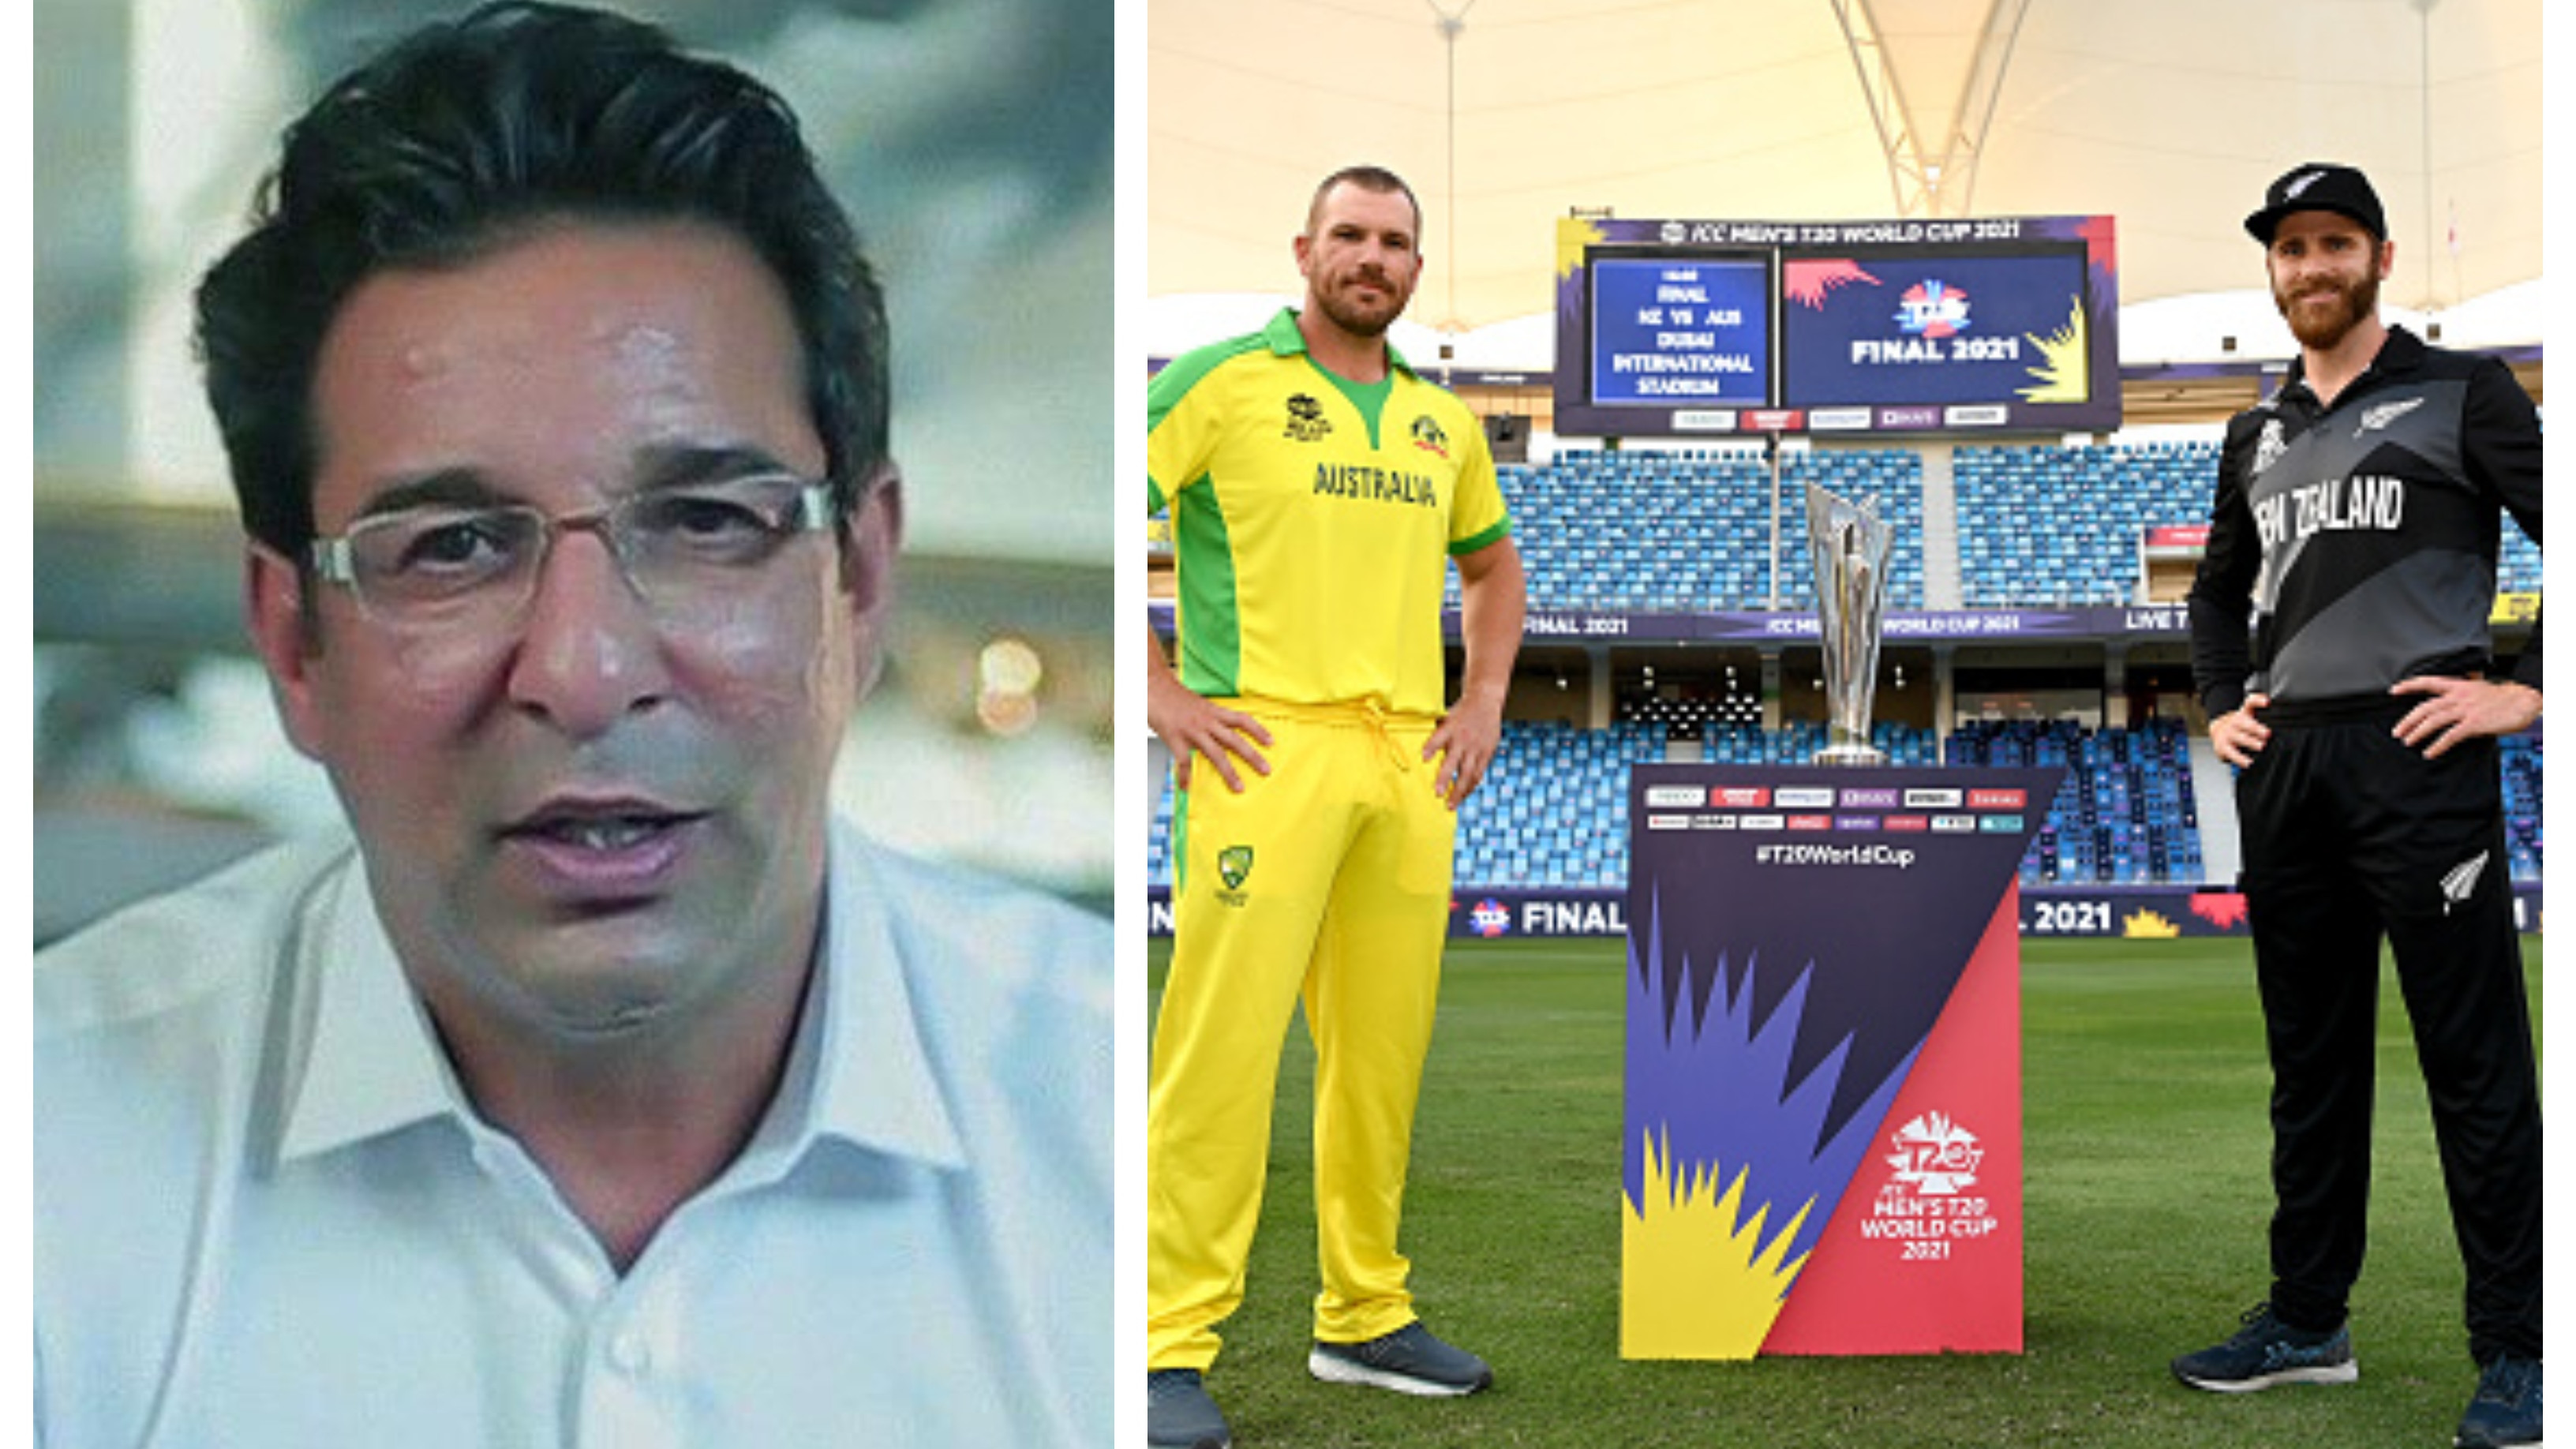 T20 World Cup 2021: ‘Australians have an edge over New Zealand’, opines Wasim Akram ahead of final